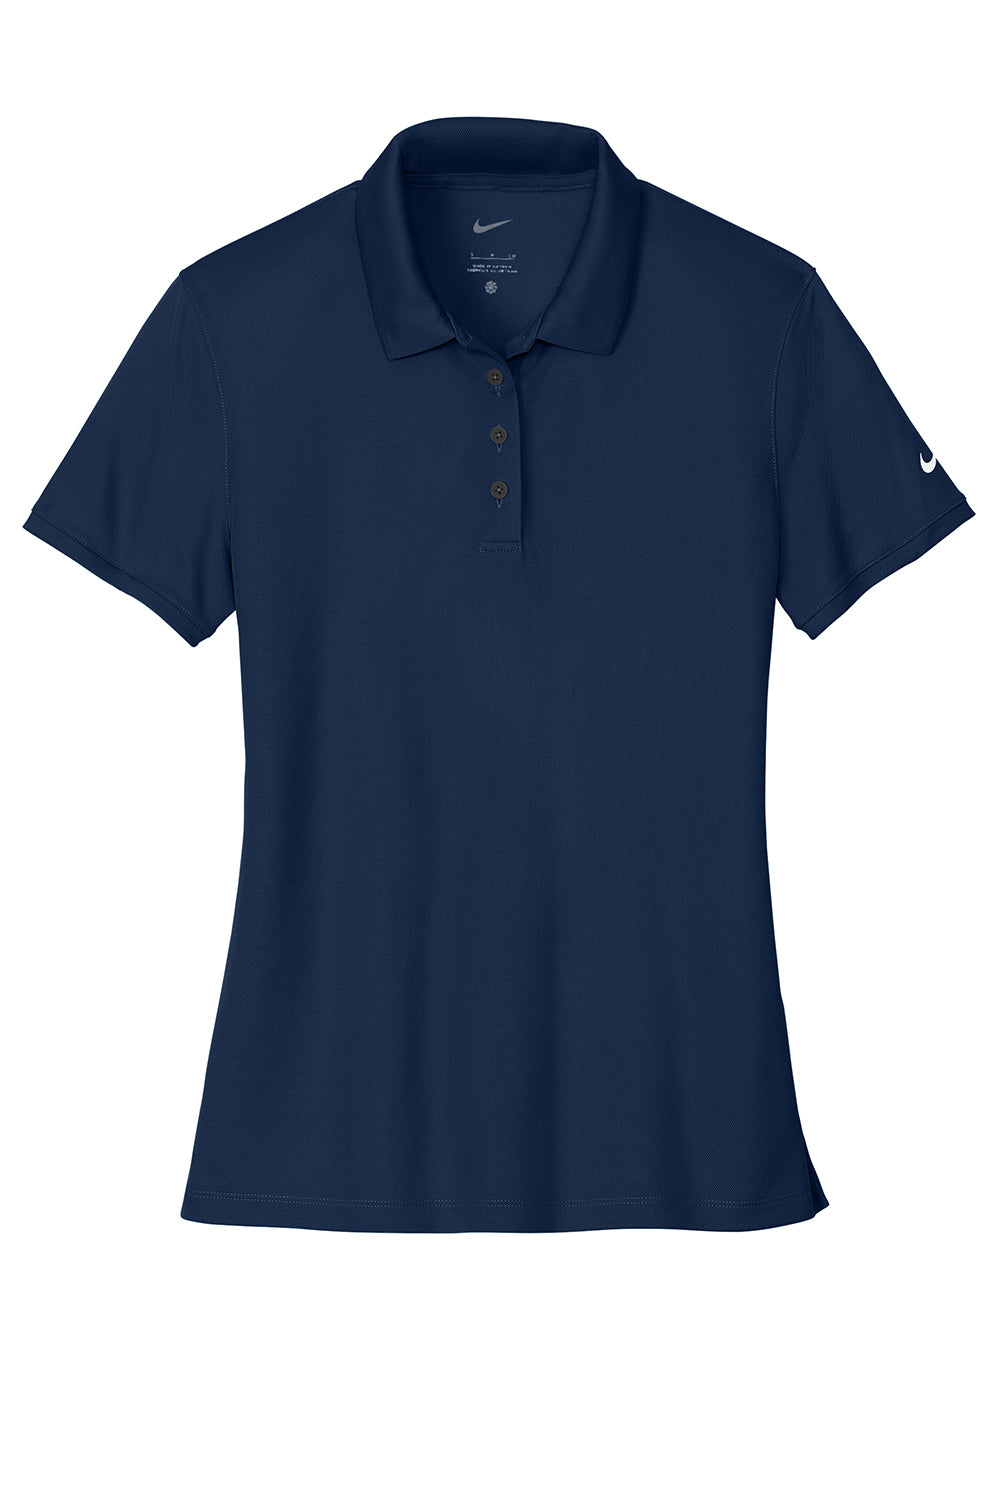 Nike NKDX6685 Womens Victory Dri-Fit Moisture Wicking Short Sleeve Polo Shirt College Navy Blue Flat Front